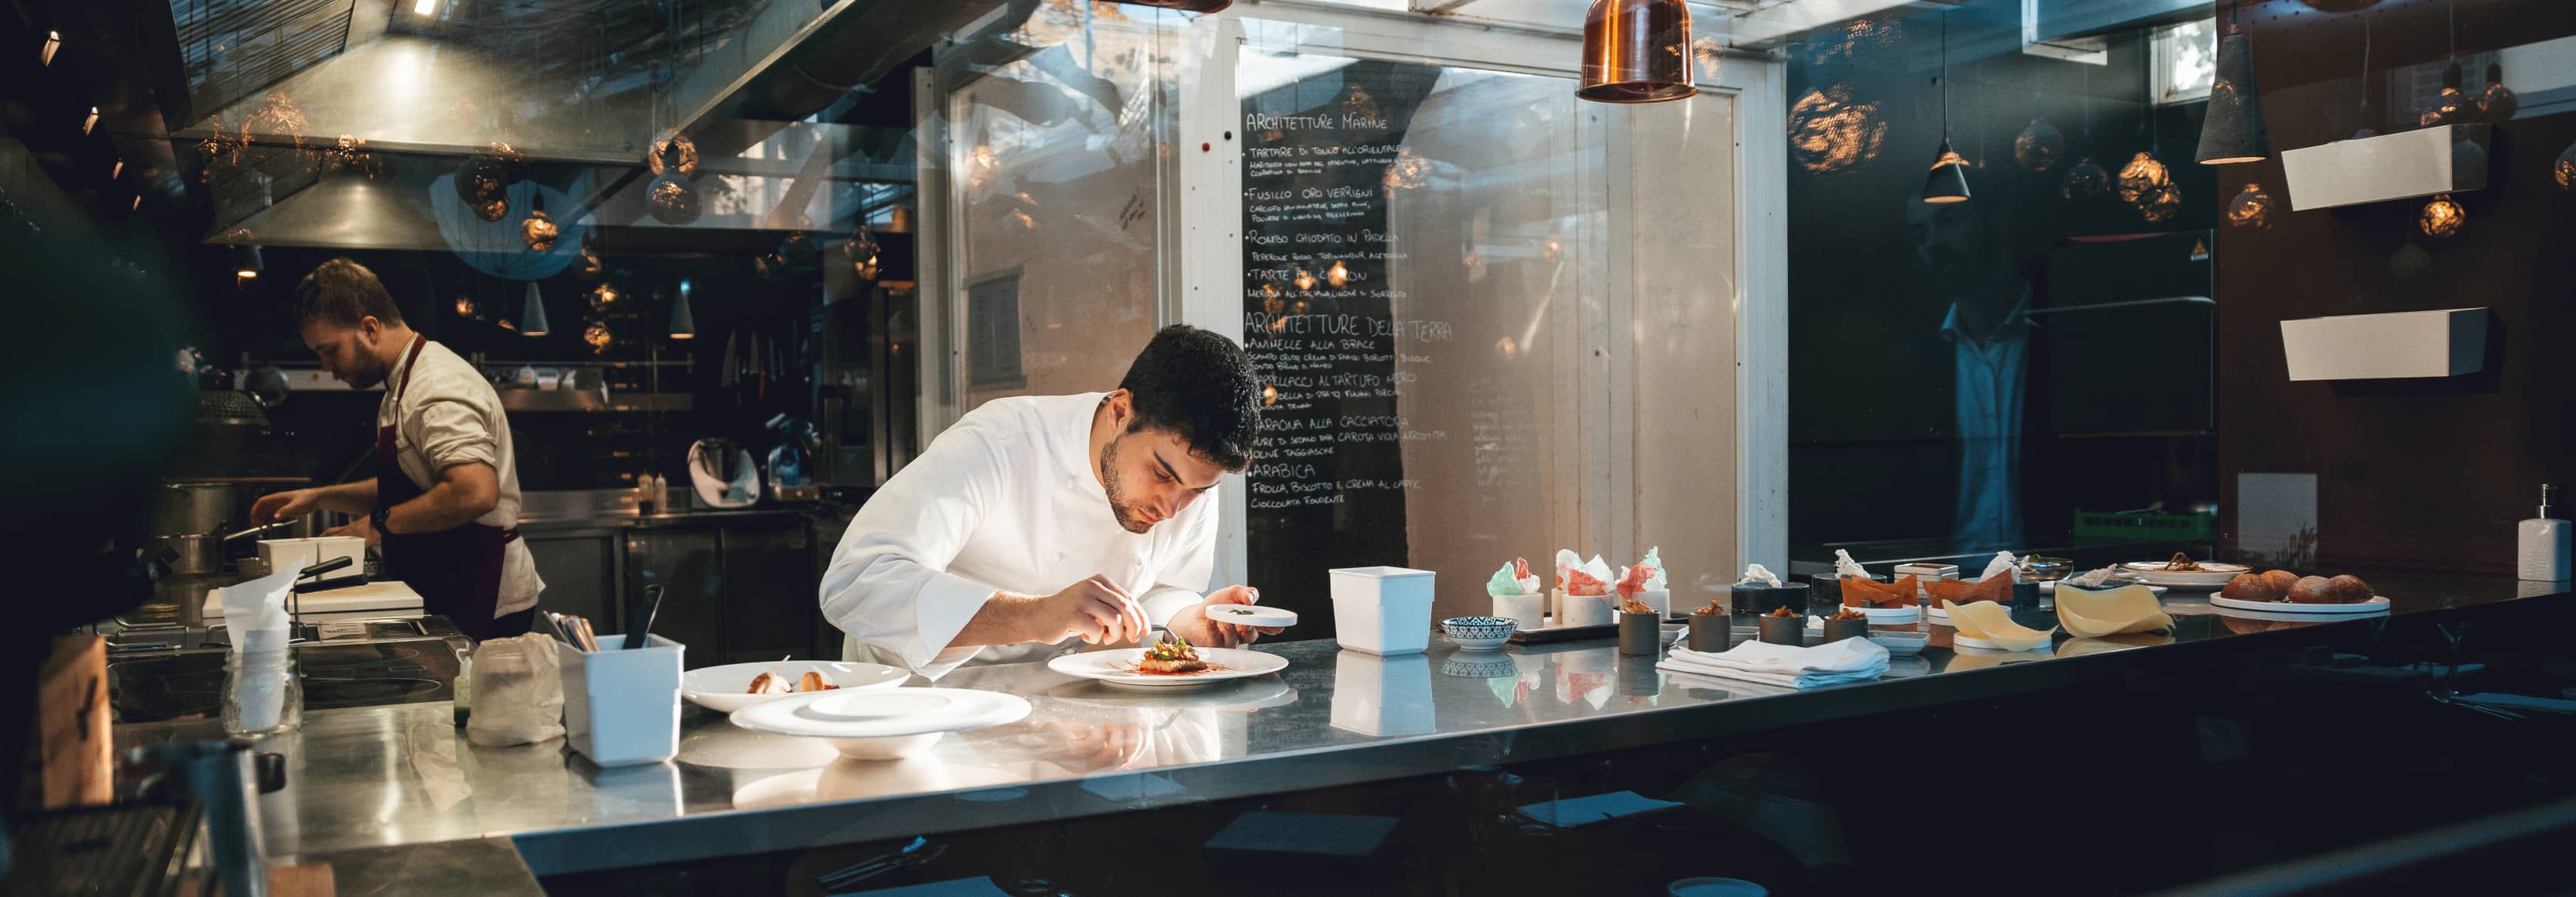 Chef in a high-end restaurant kitchen attentitively plating a meal